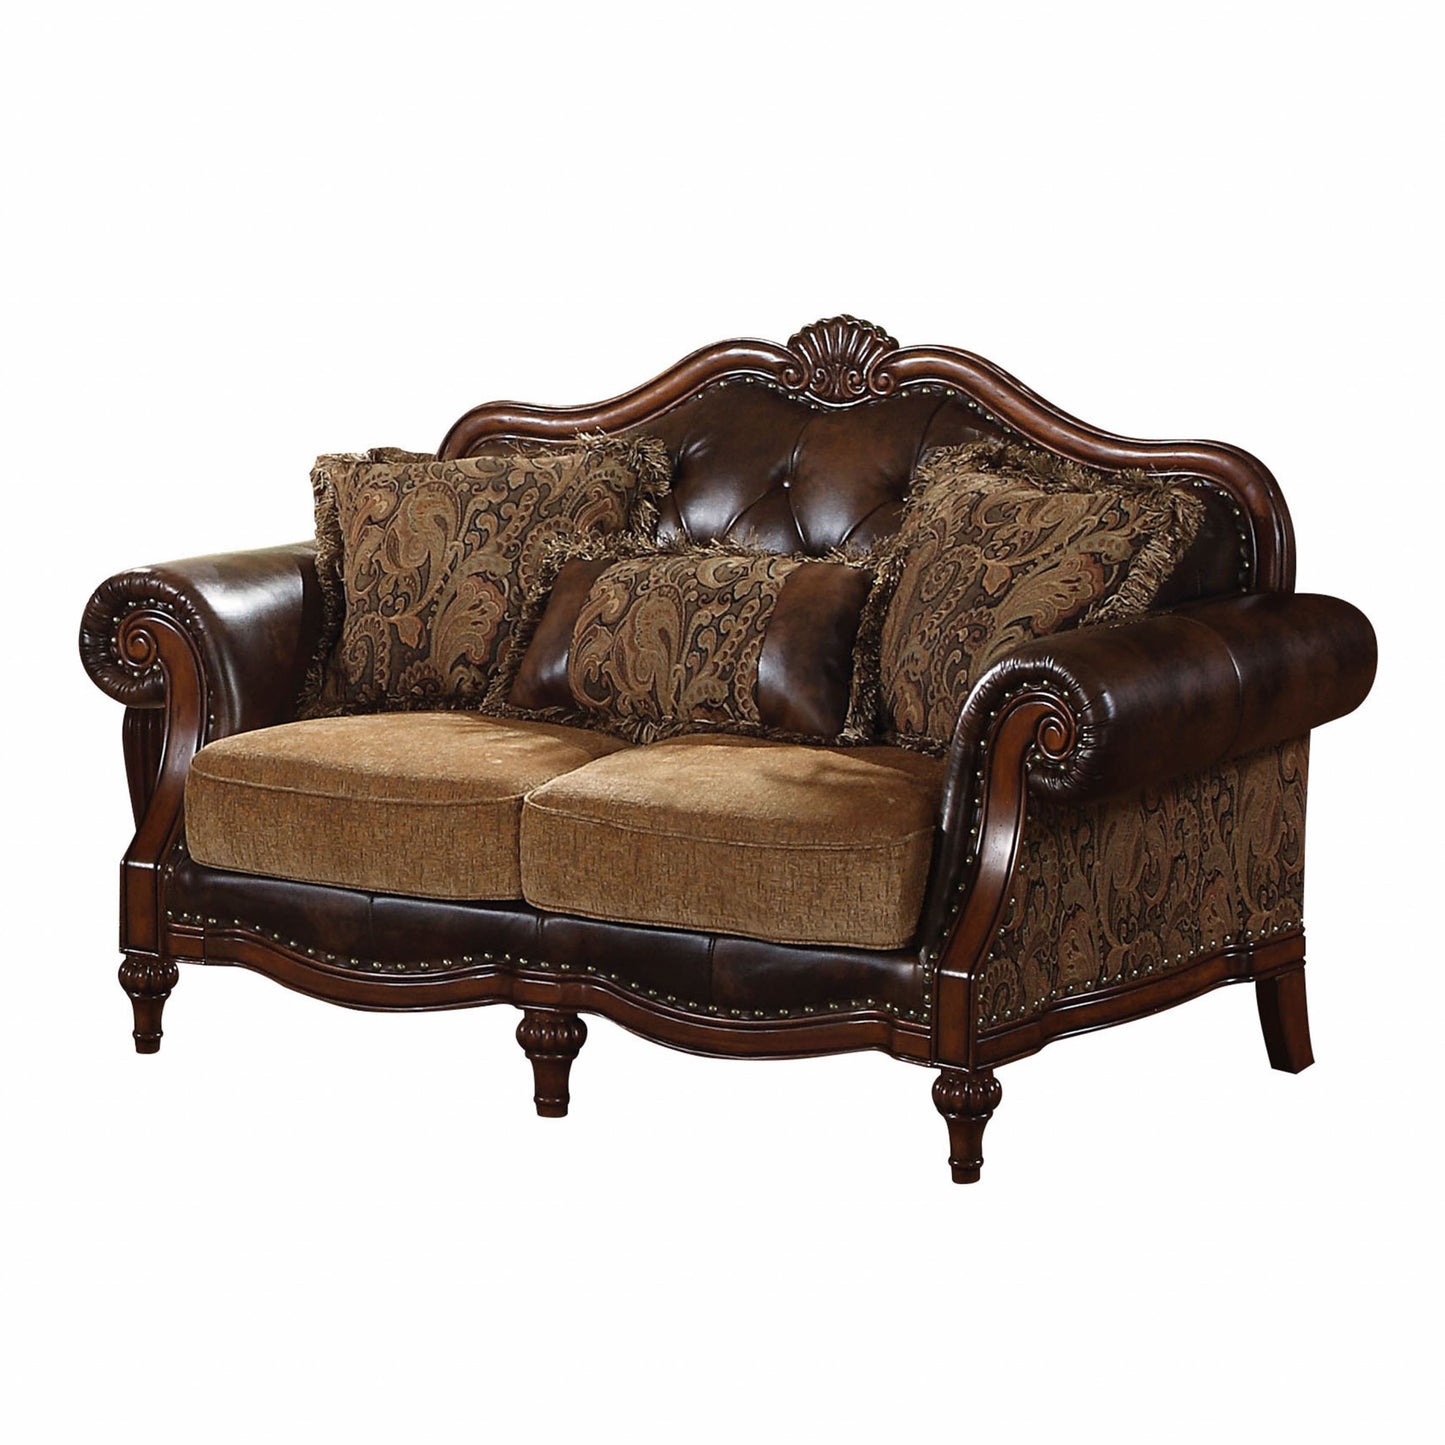 70" Brown Faux Leather Chesterfield Loveseat